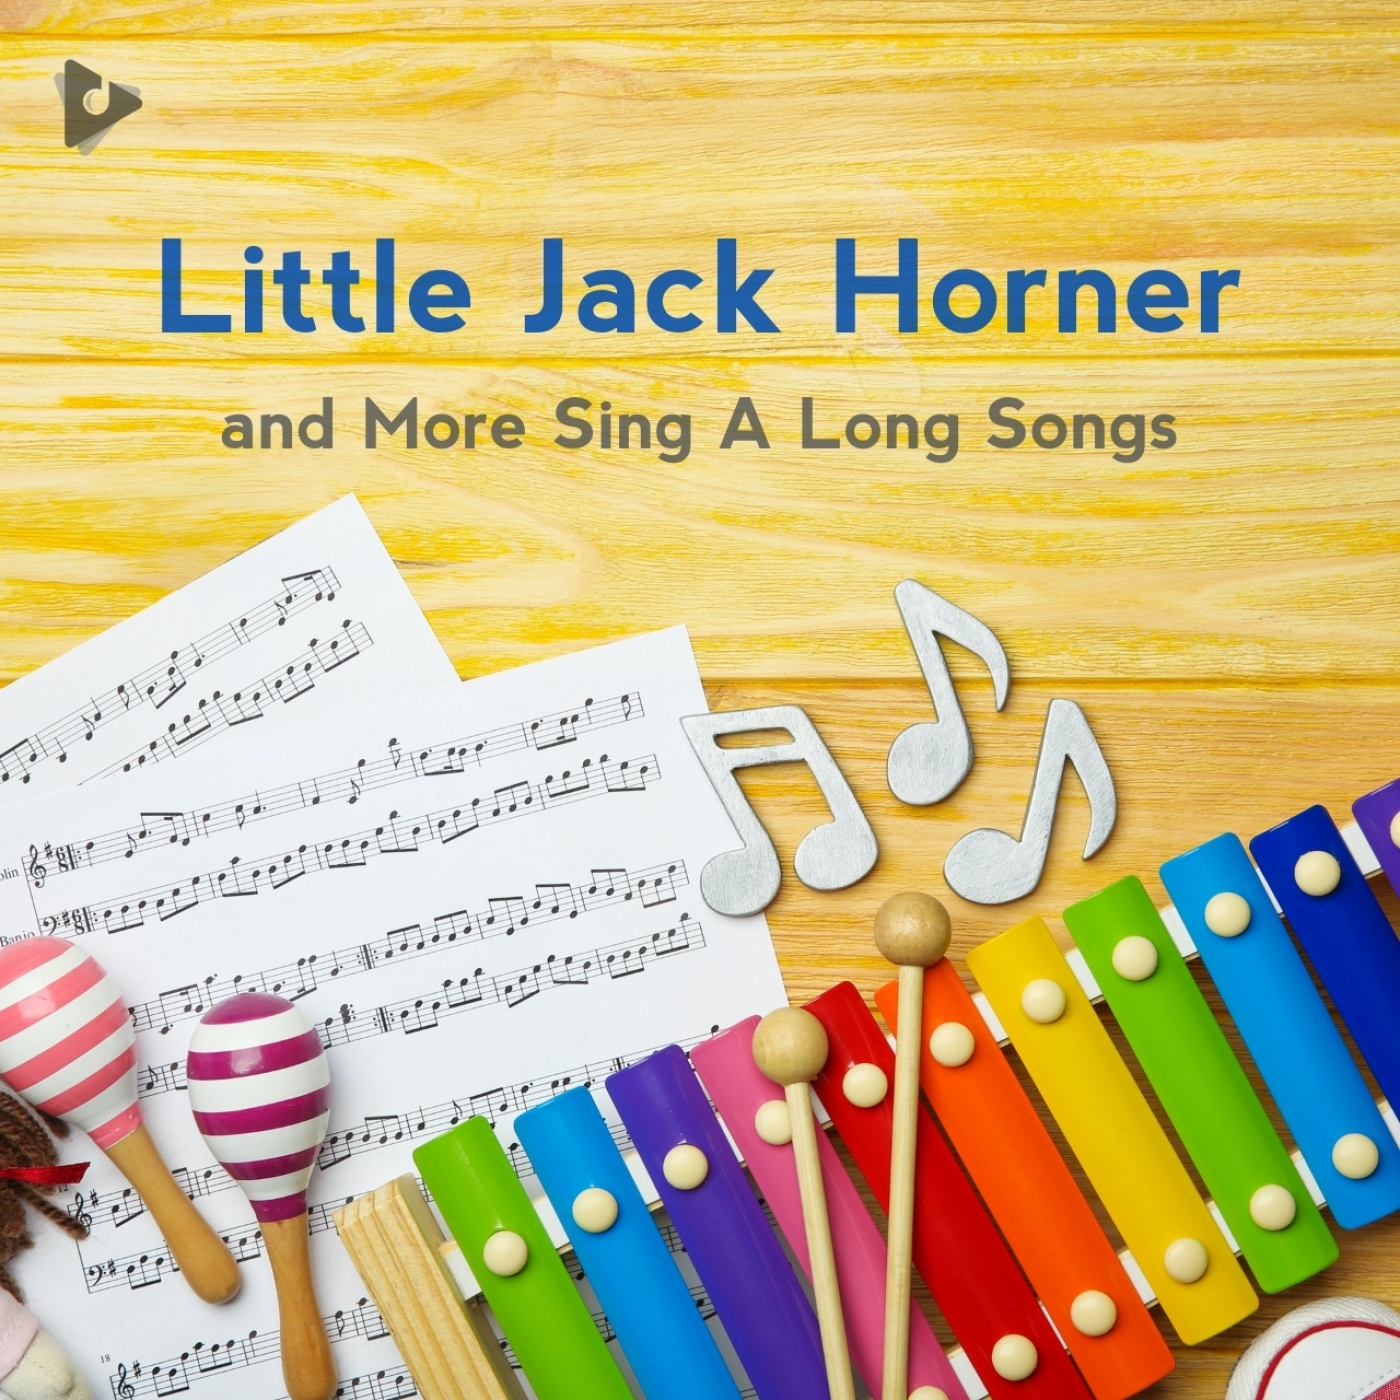 Little Jack Horner and More Sing A Long Songs